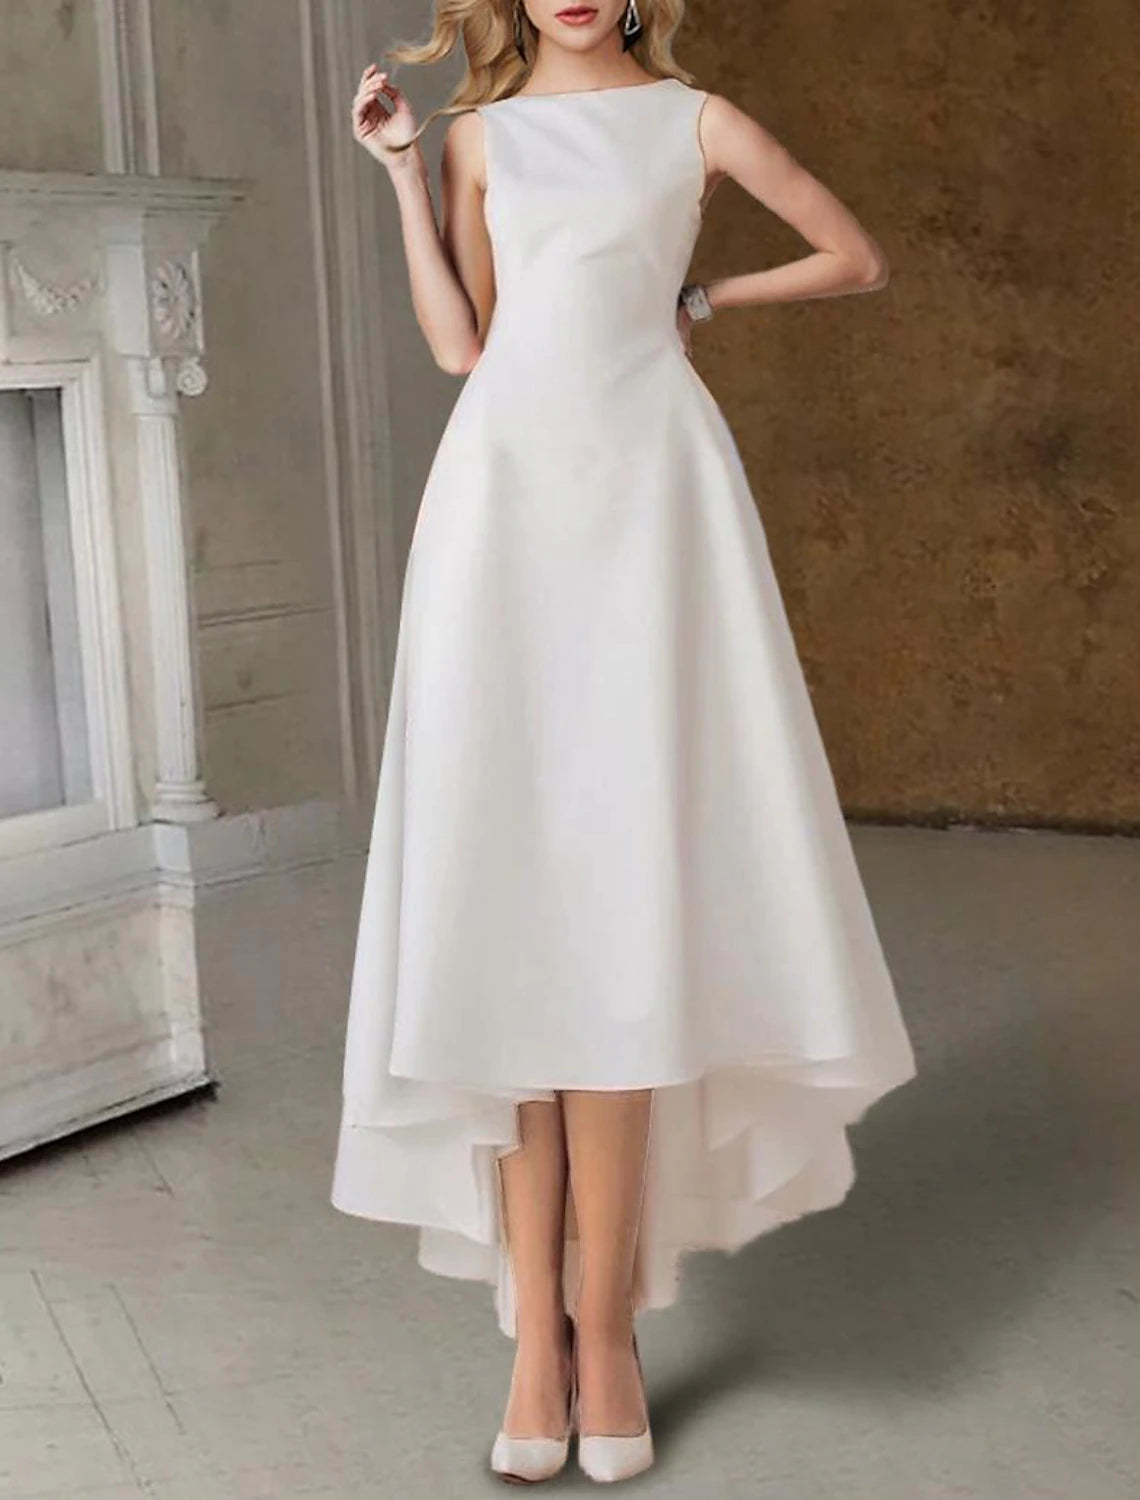 Hall Little White Dresses Wedding Dresses A-Line Scoop Neck Sleeveless Tea Length Satin Bridal Gowns With Pleats Solid Color